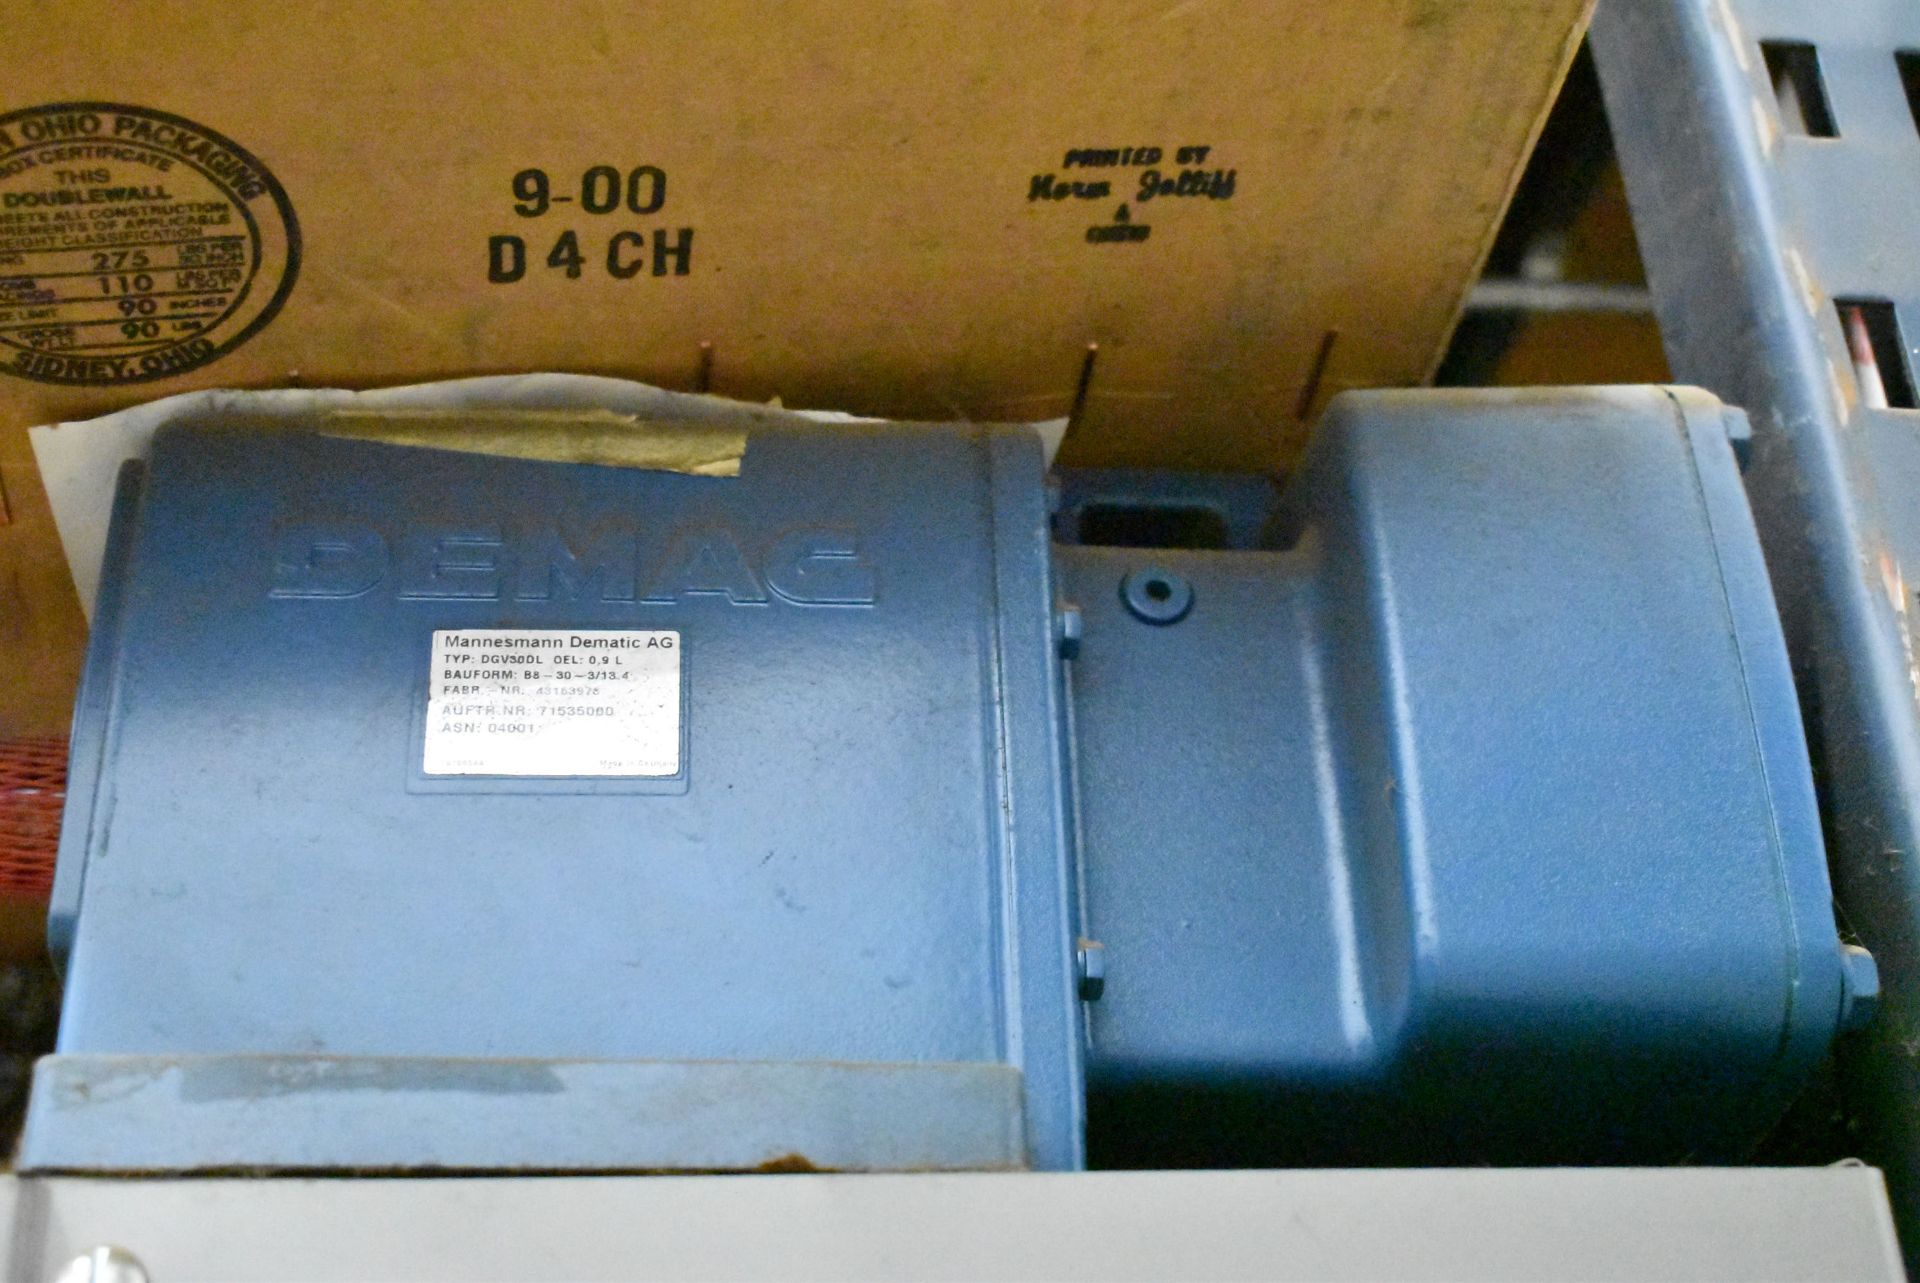 LOT/ SHELF WITH CONTENTS - INCLUDING DEMAG HOIST UNIT, BREAKERS, FUSES, ELECTRICAL COMPONENTS [ - Image 3 of 8